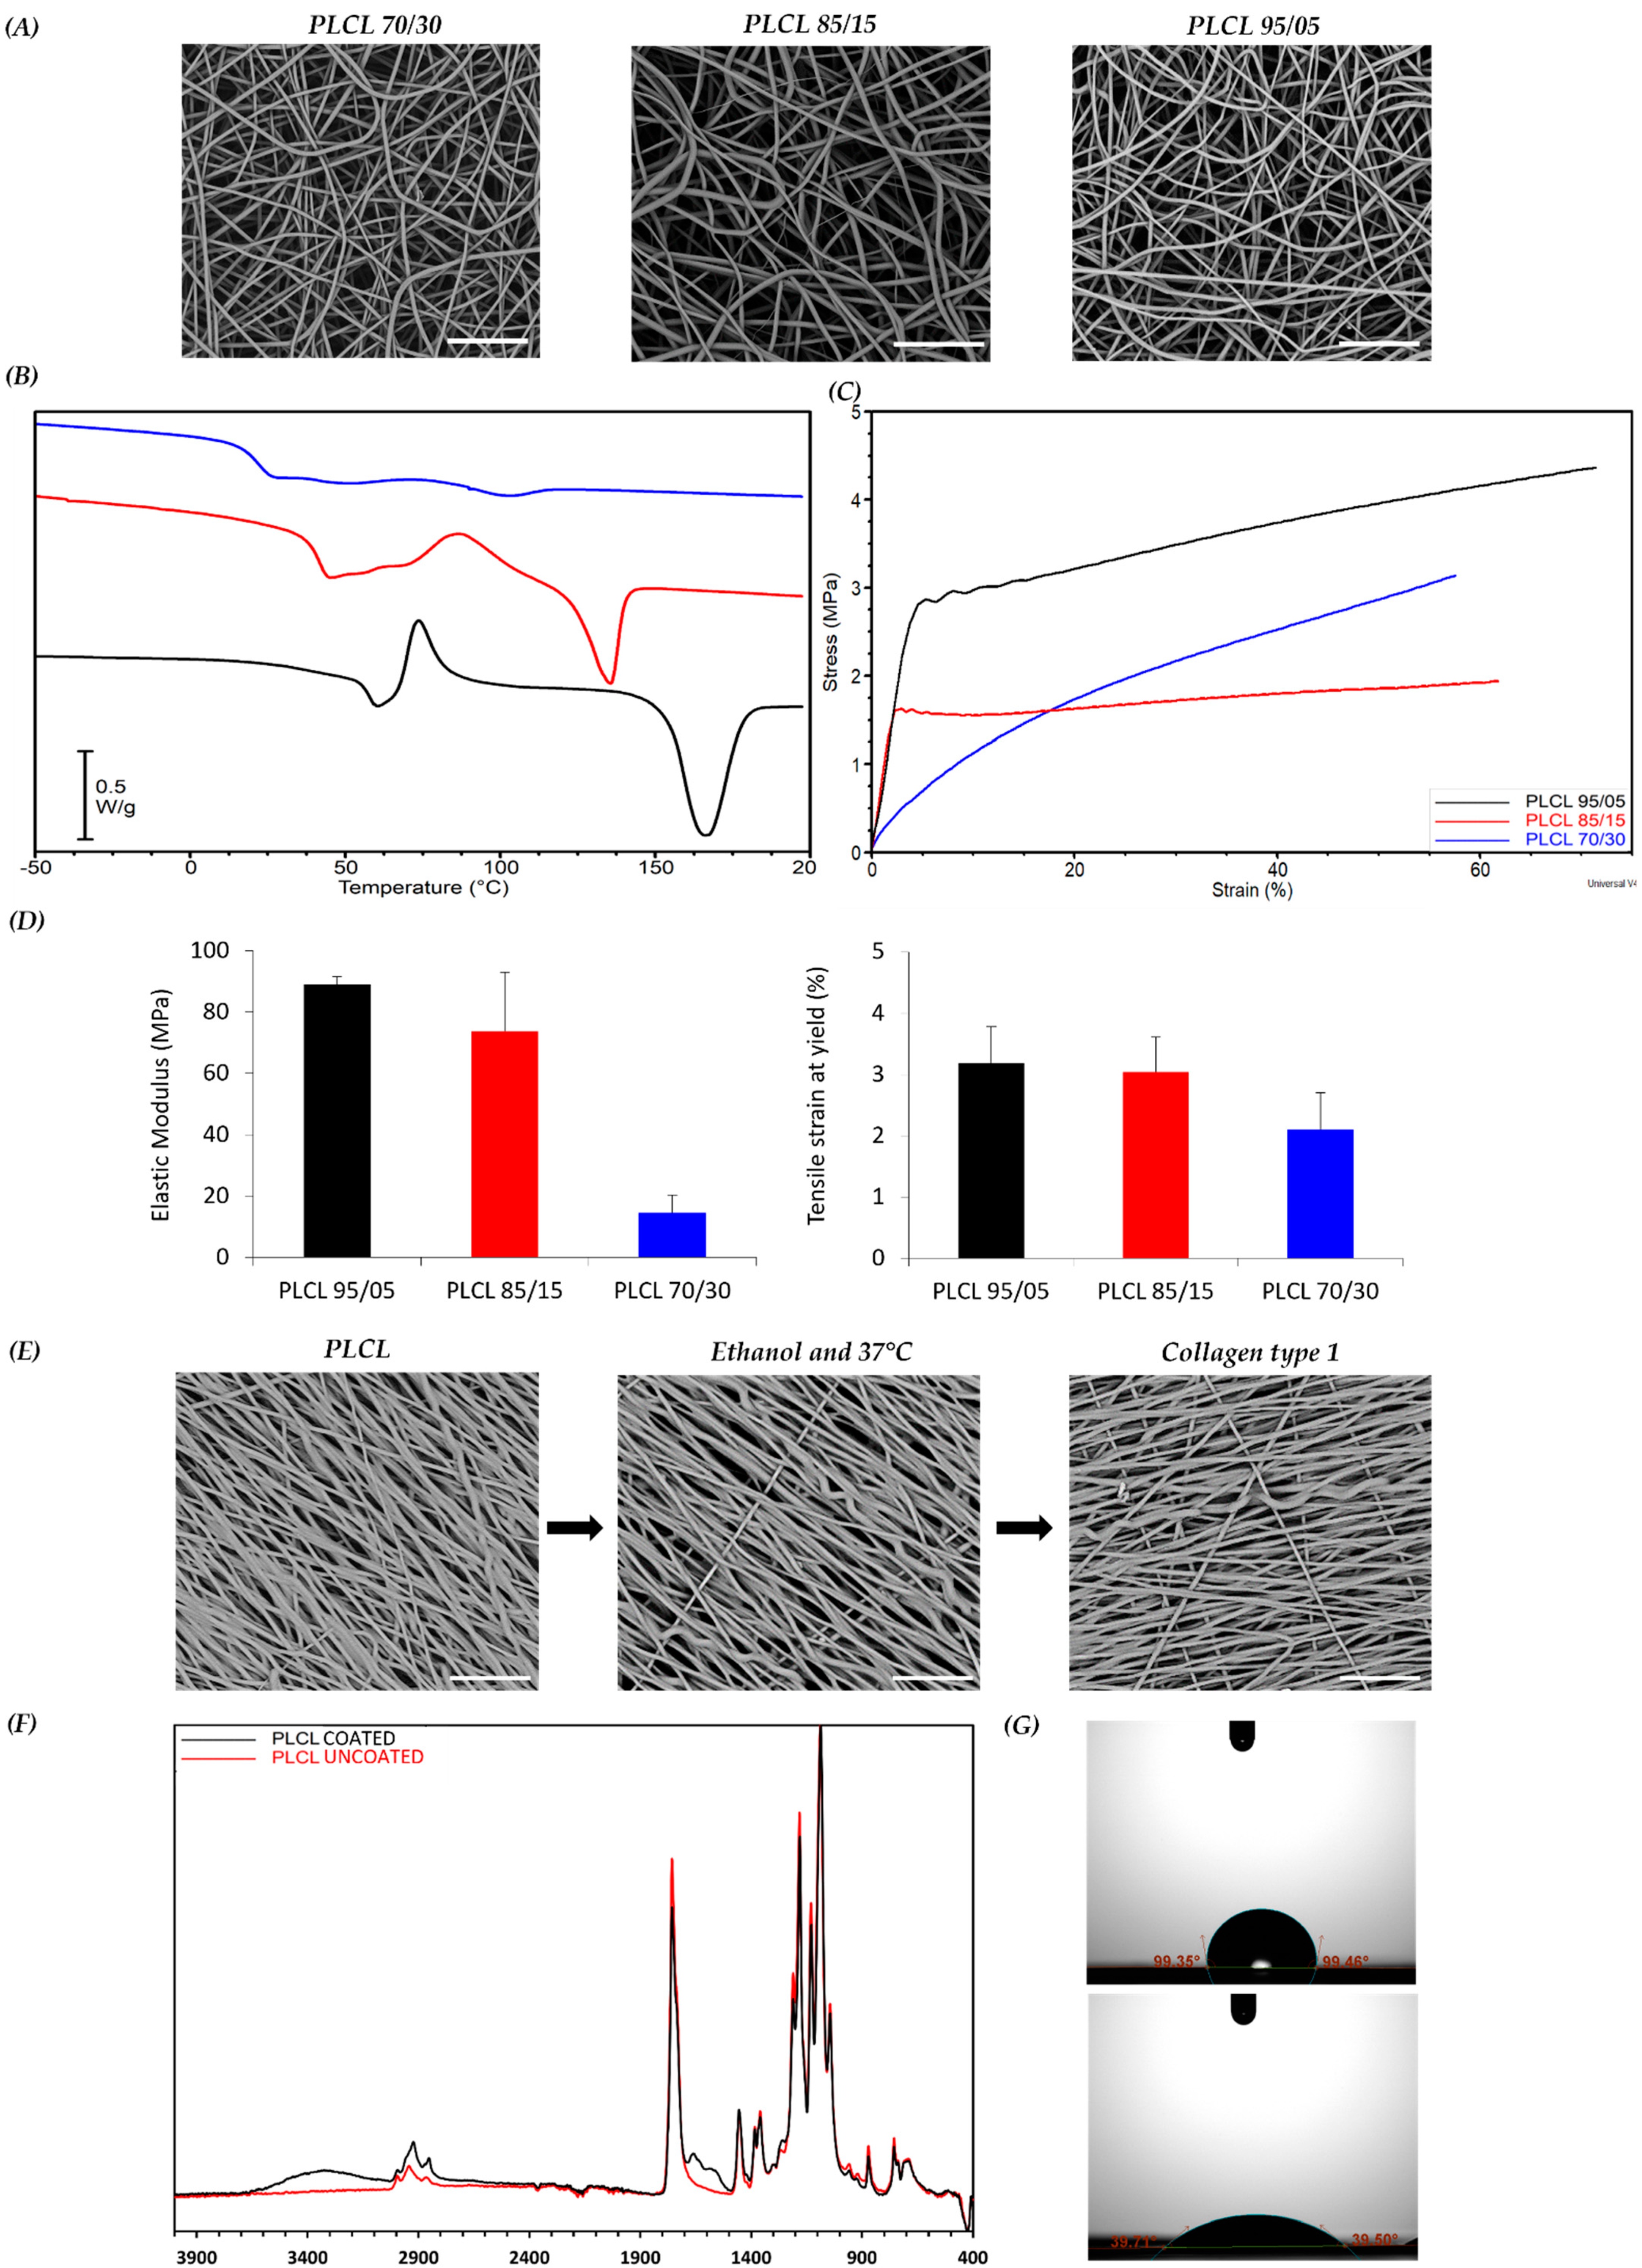 Bioengineering | Free Full-Text | Electrospun  Poly(L-lactide-co-ε-caprolactone) Scaffold Potentiates C2C12  Myoblast Bioactivity and Acts as a Stimulus for Cell Commitment in Skeletal  Muscle Myogenesis